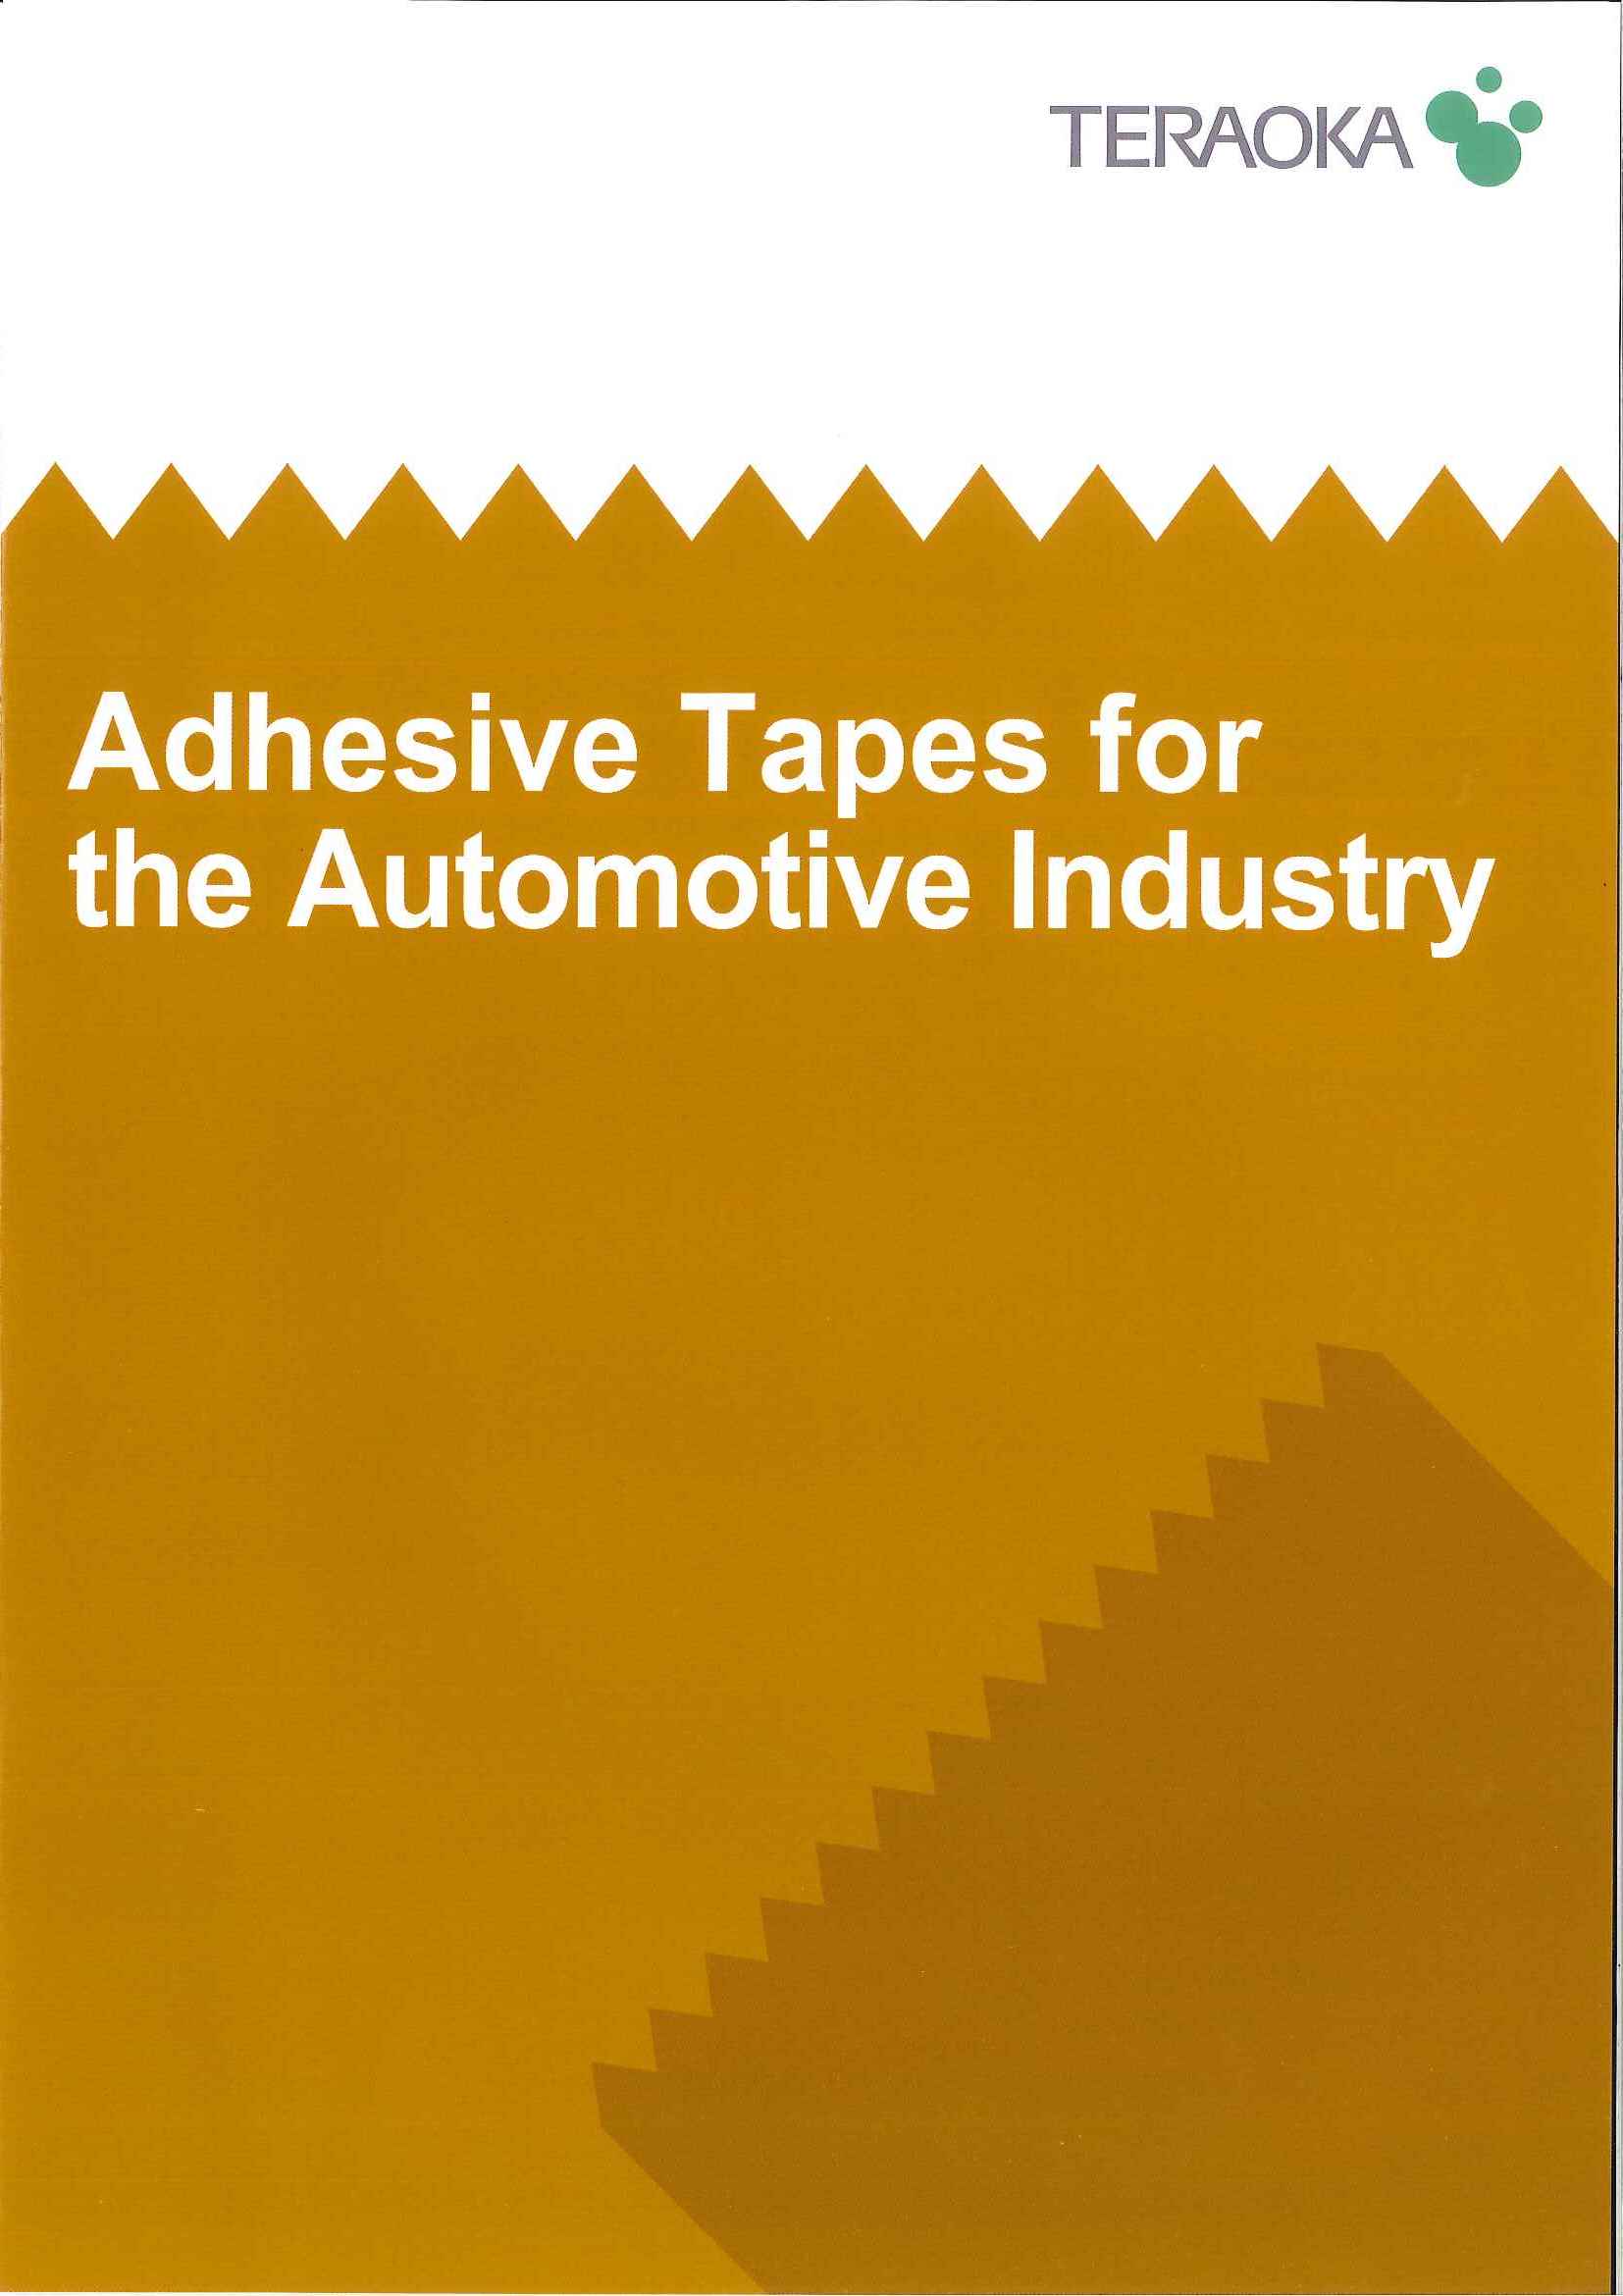 Adhesive Tapes for the Automotive Industry